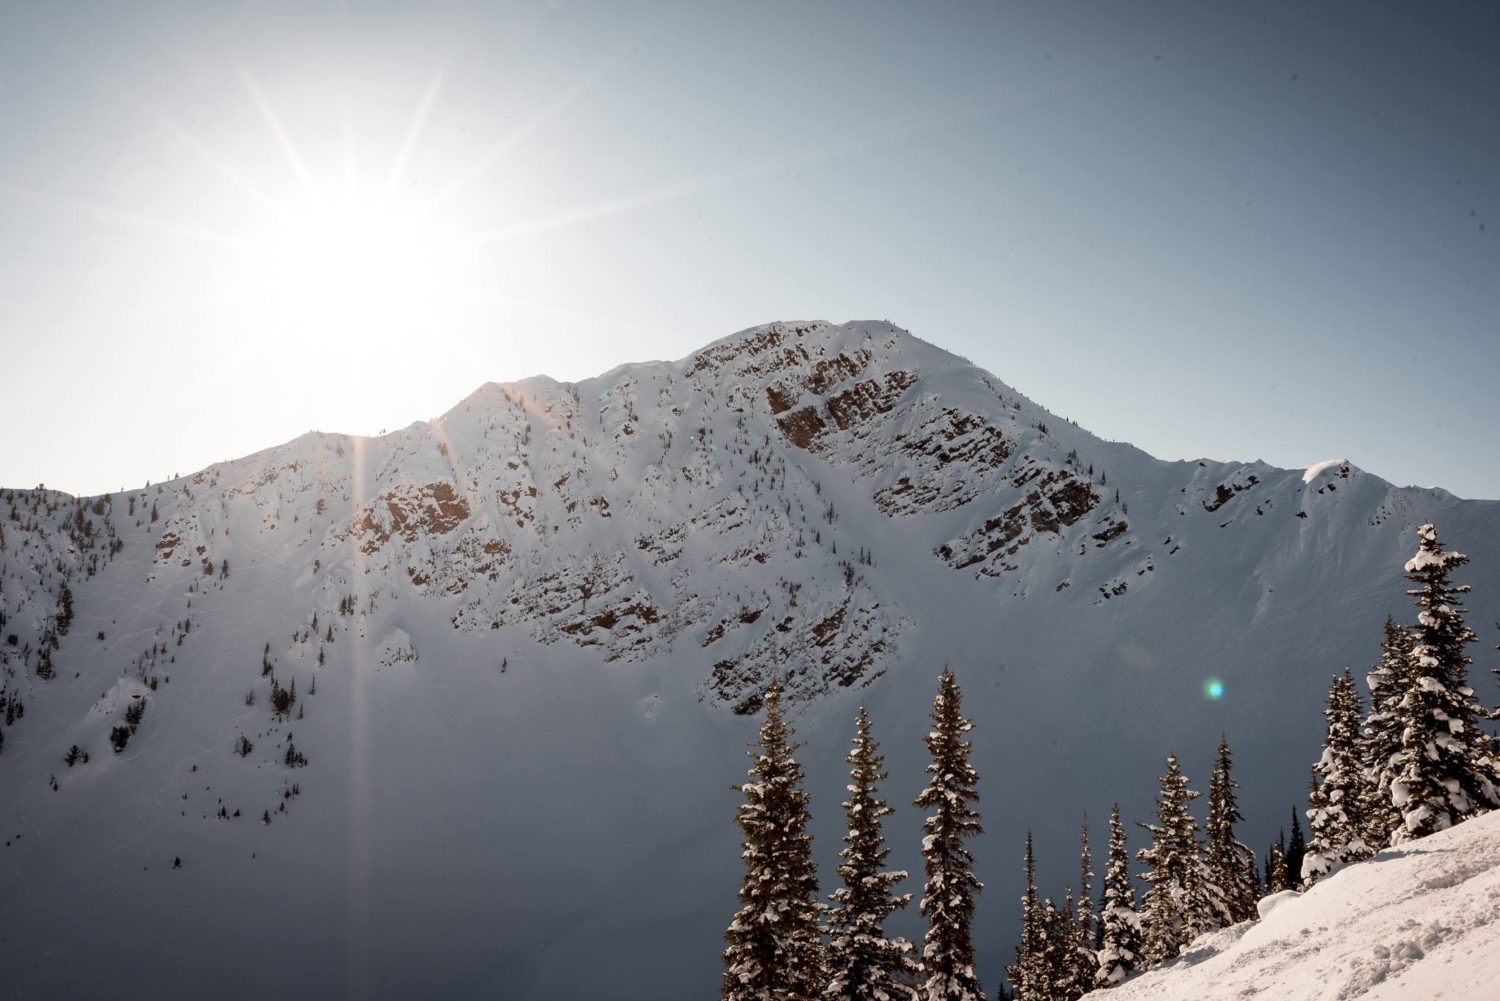 Kicking horse has some gnarly terrain - and these athletes are going to hit it